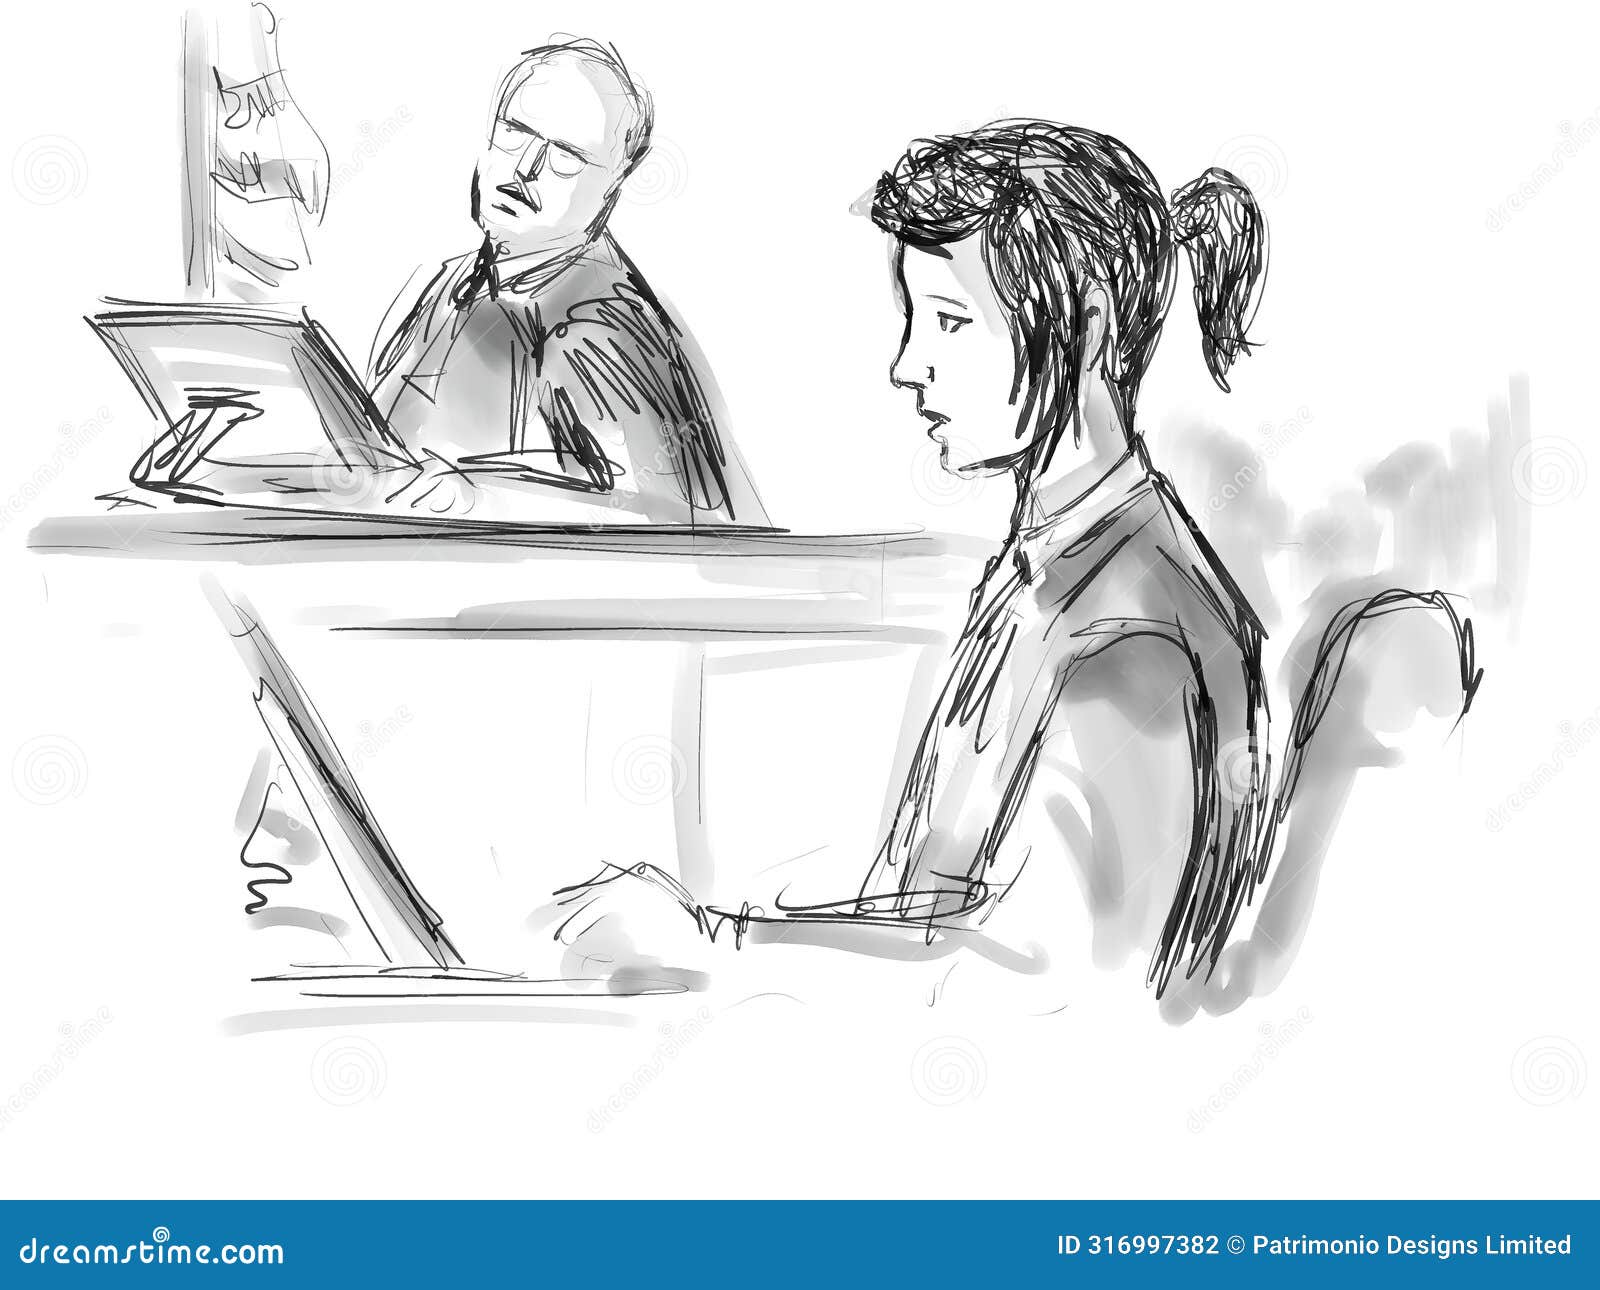 courtroom trial sketch showing judge and young female defendant plaintiff witness on stand in court of law